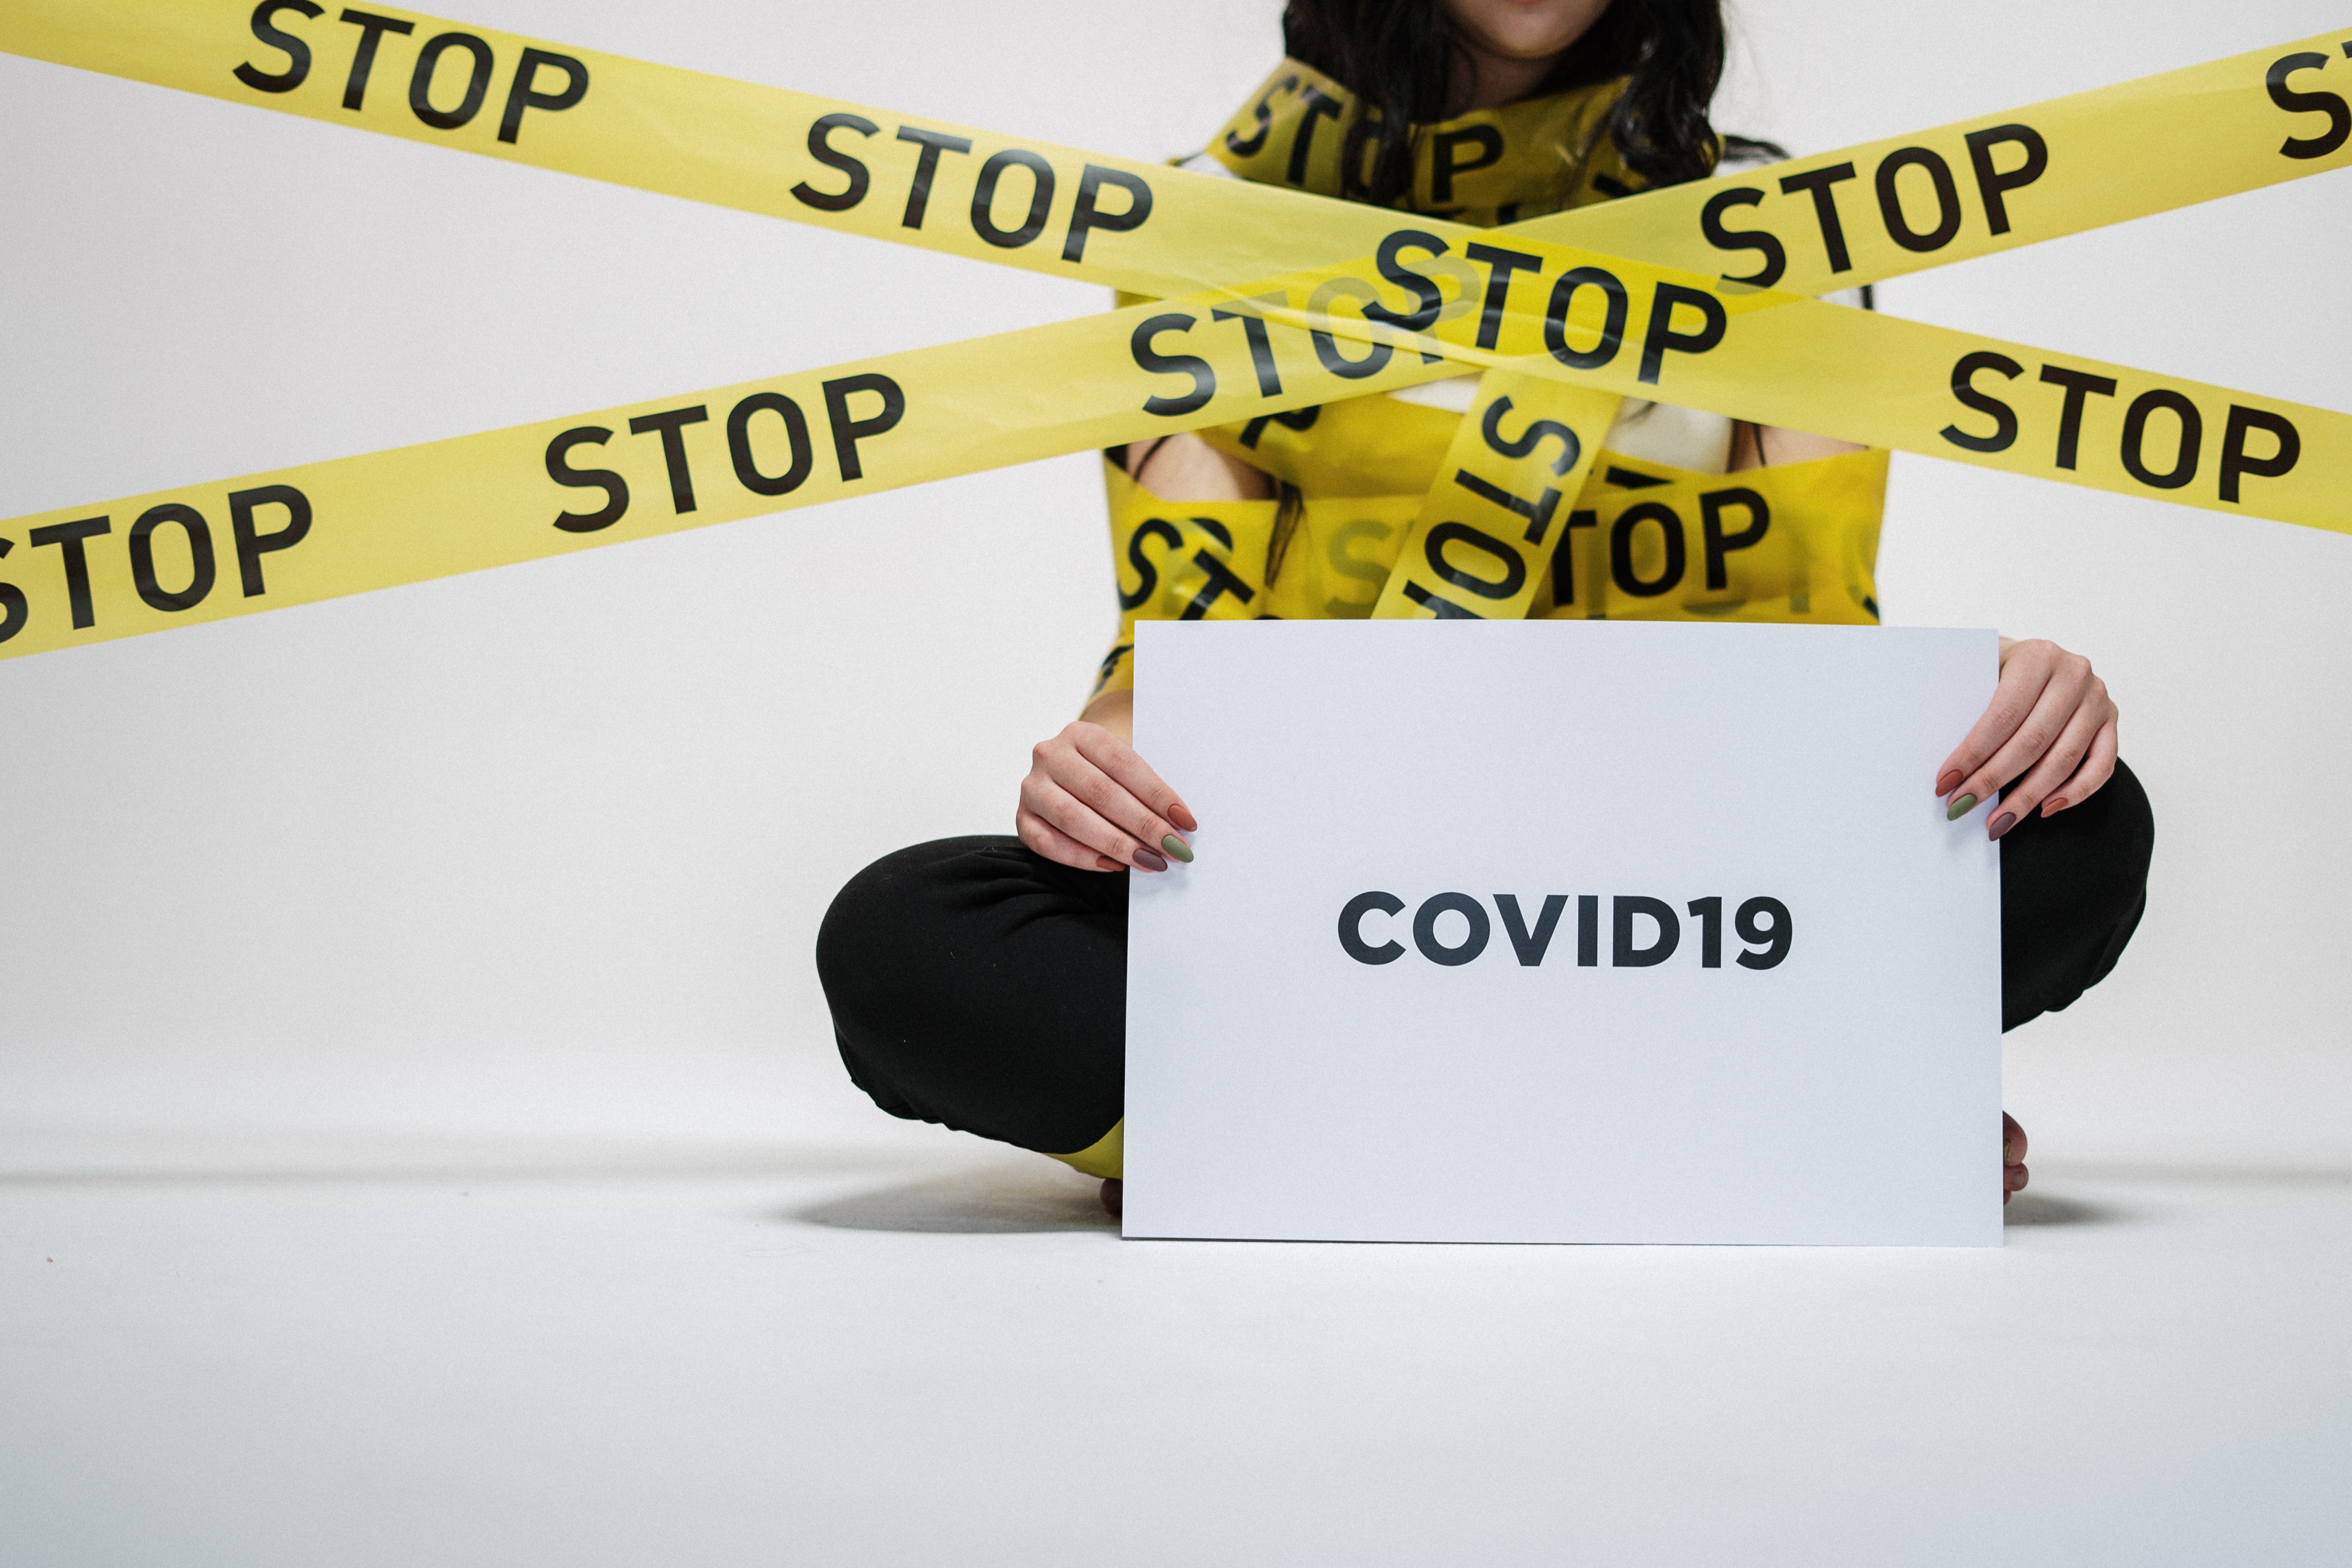 Stop COVID-19 and Promote Safety